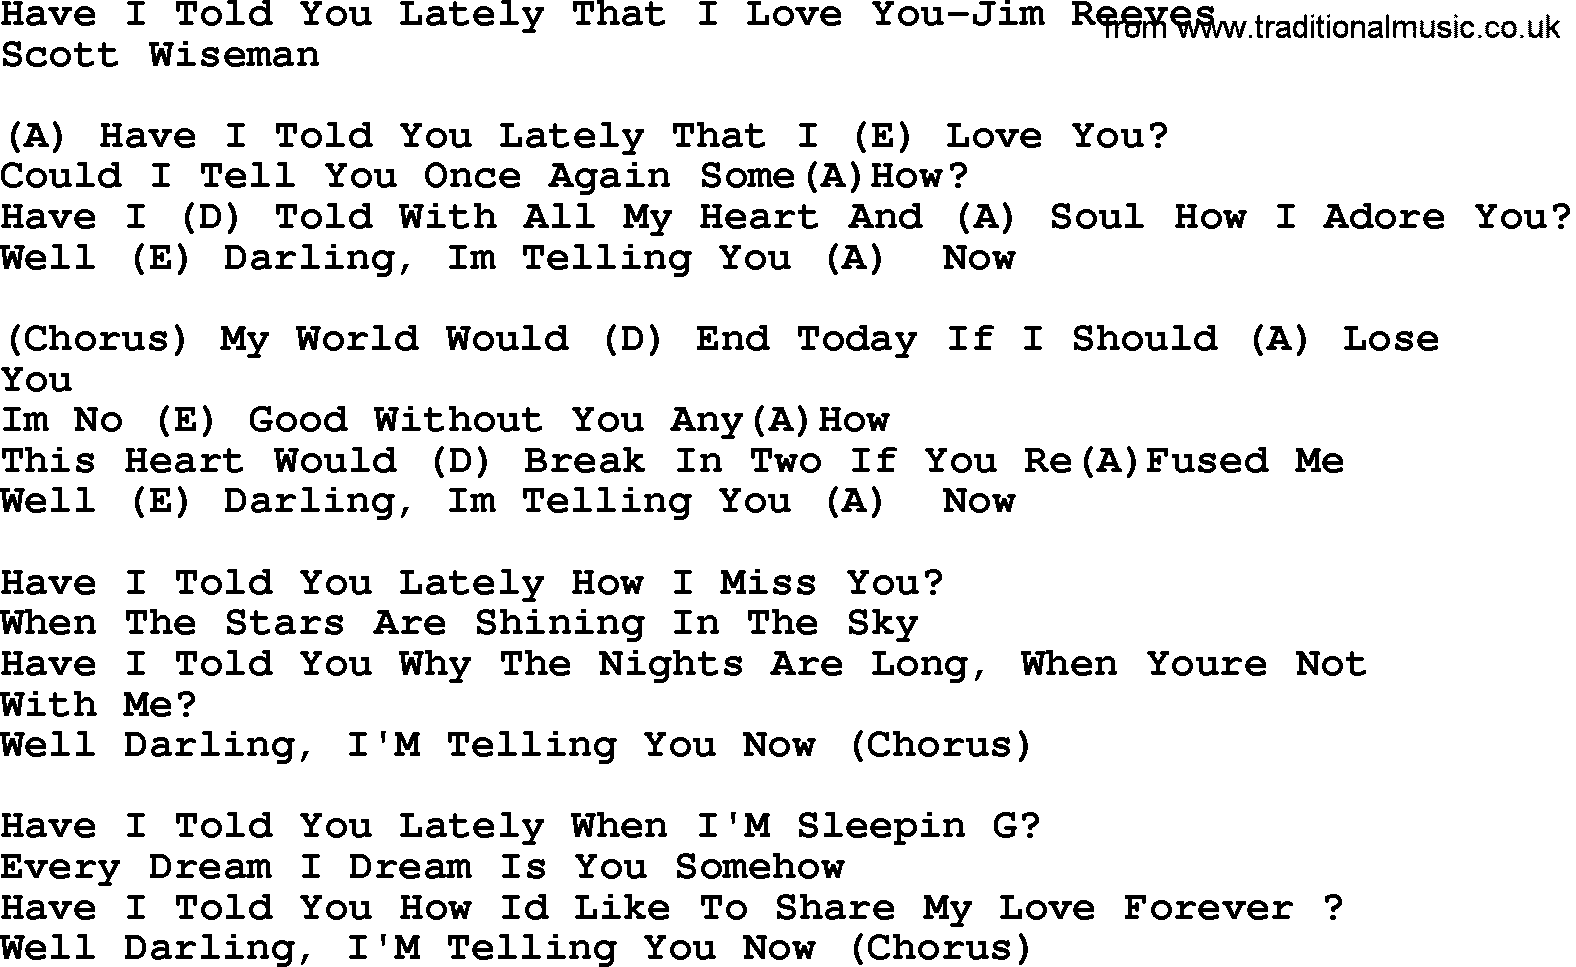 Country music song: Have I Told You Lately That I Love You-Jim Reeves lyrics and chords